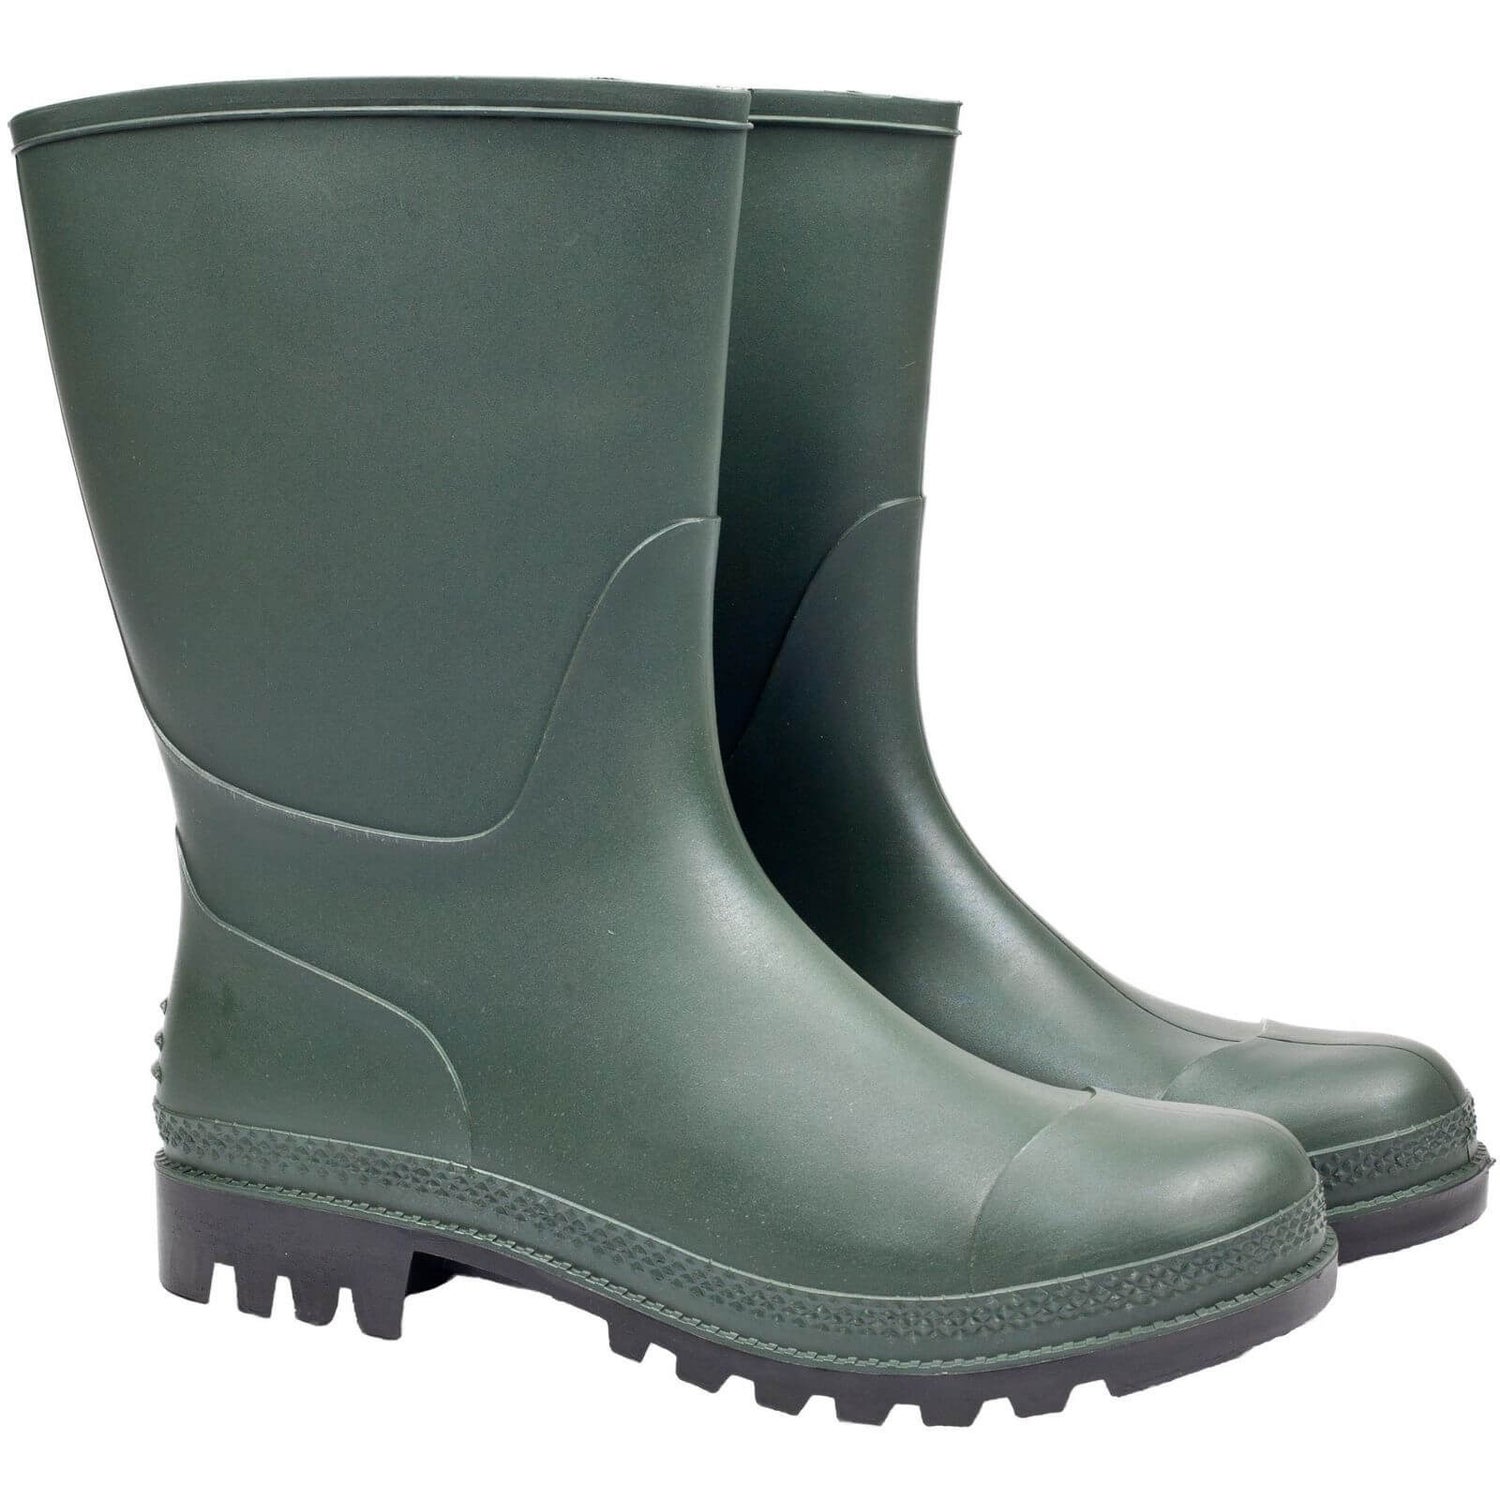 Buy > size 10 wellington boots > in stock